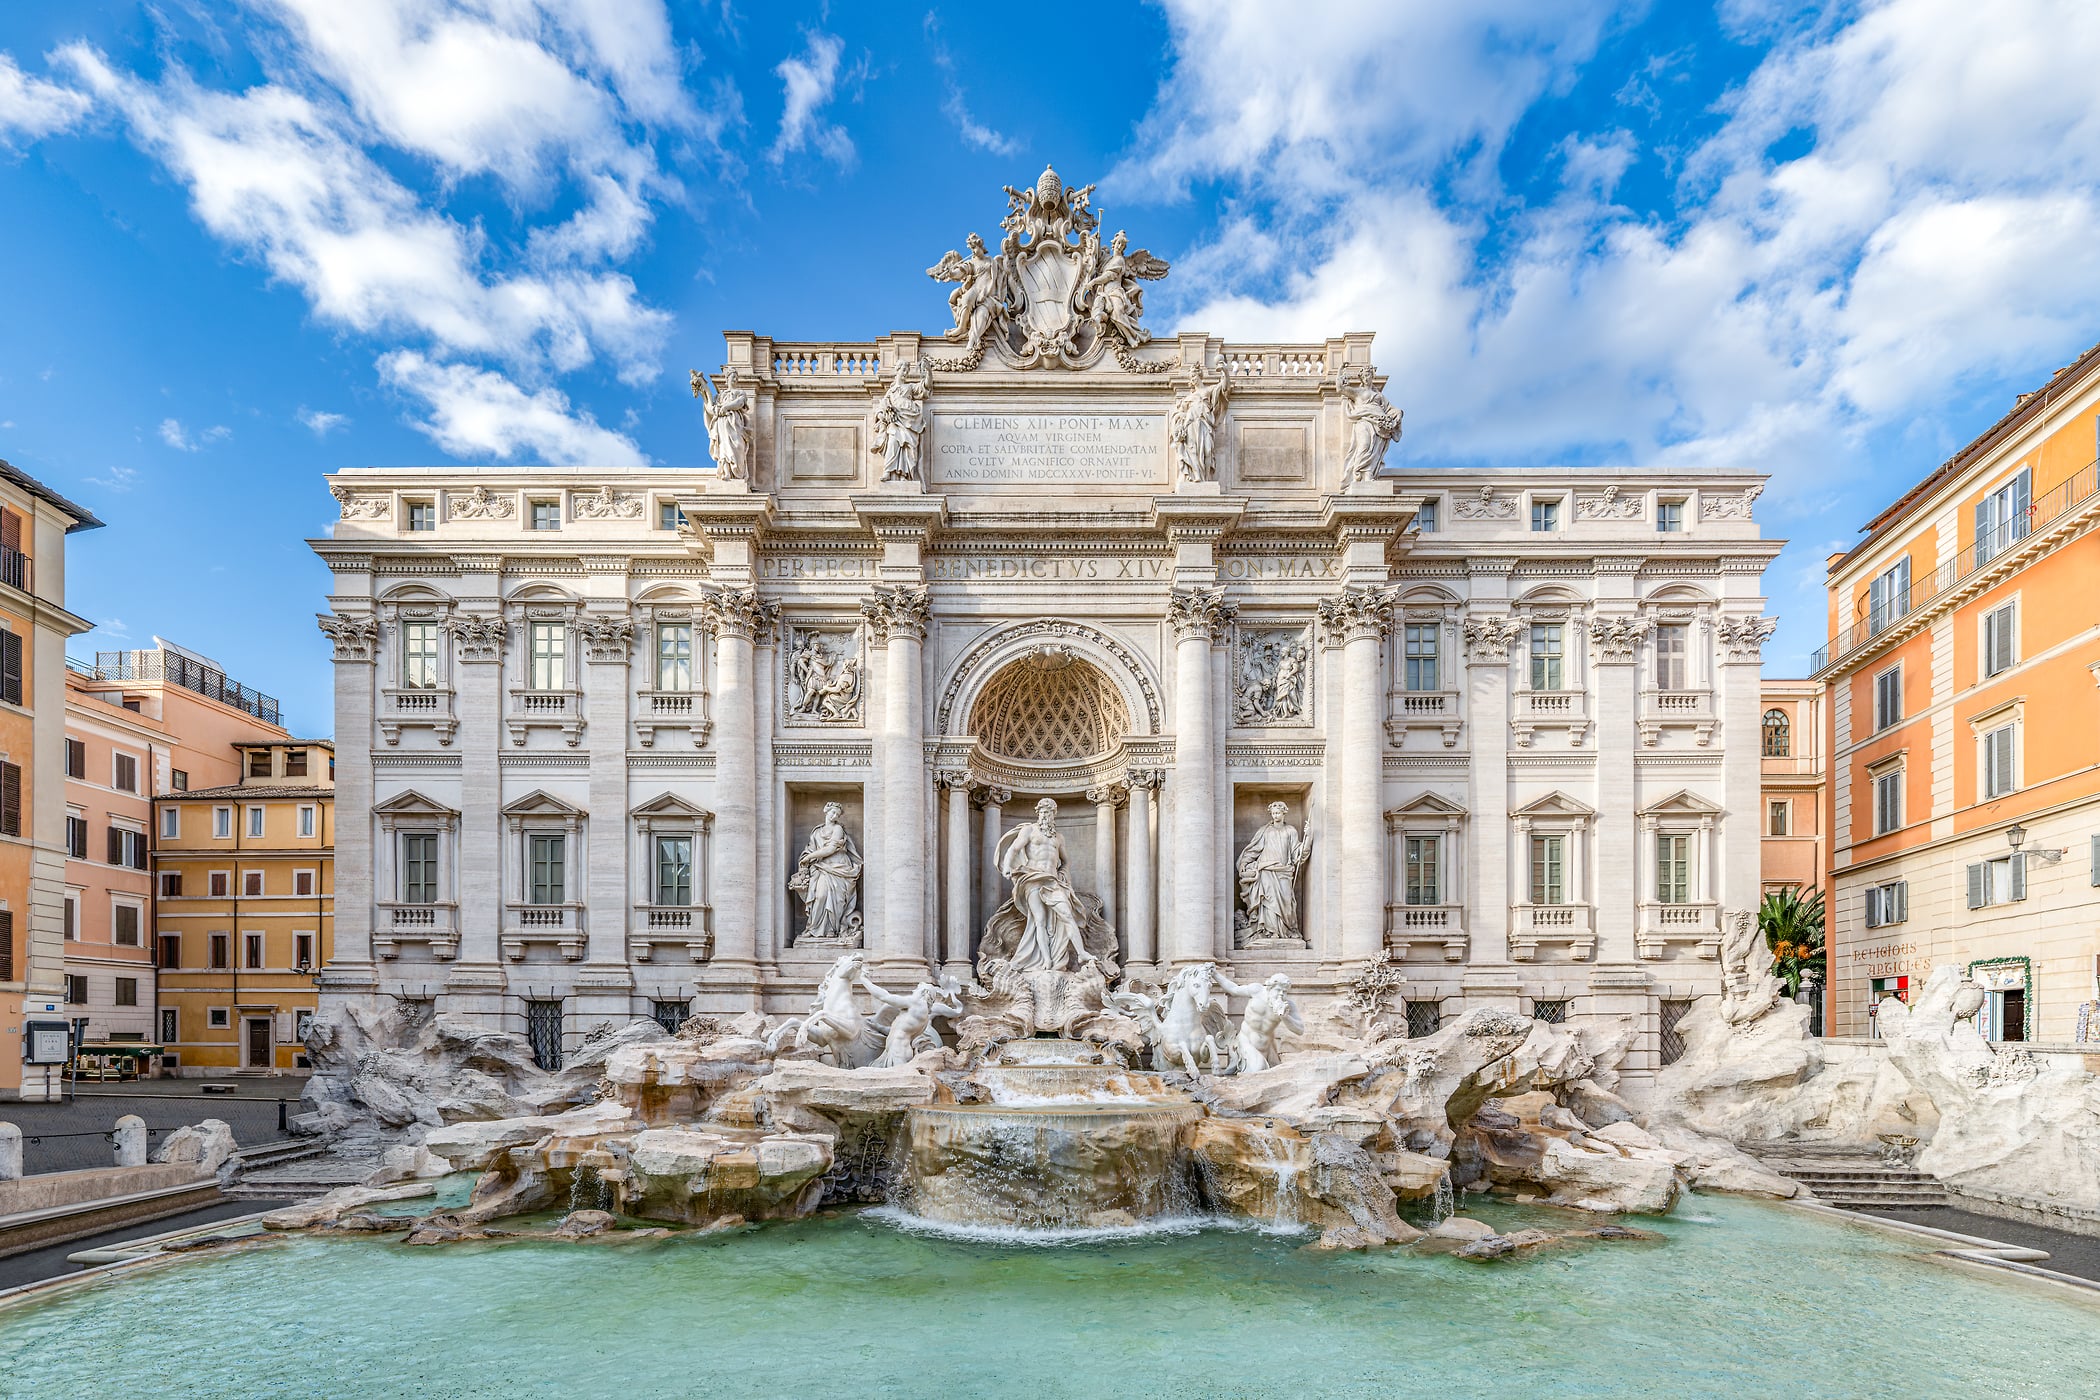 130 megapixels! A very high resolution, large-format VAST photo print of Trevi Fountain in Rome, Italy; photograph created by Tim Lo Monaco.